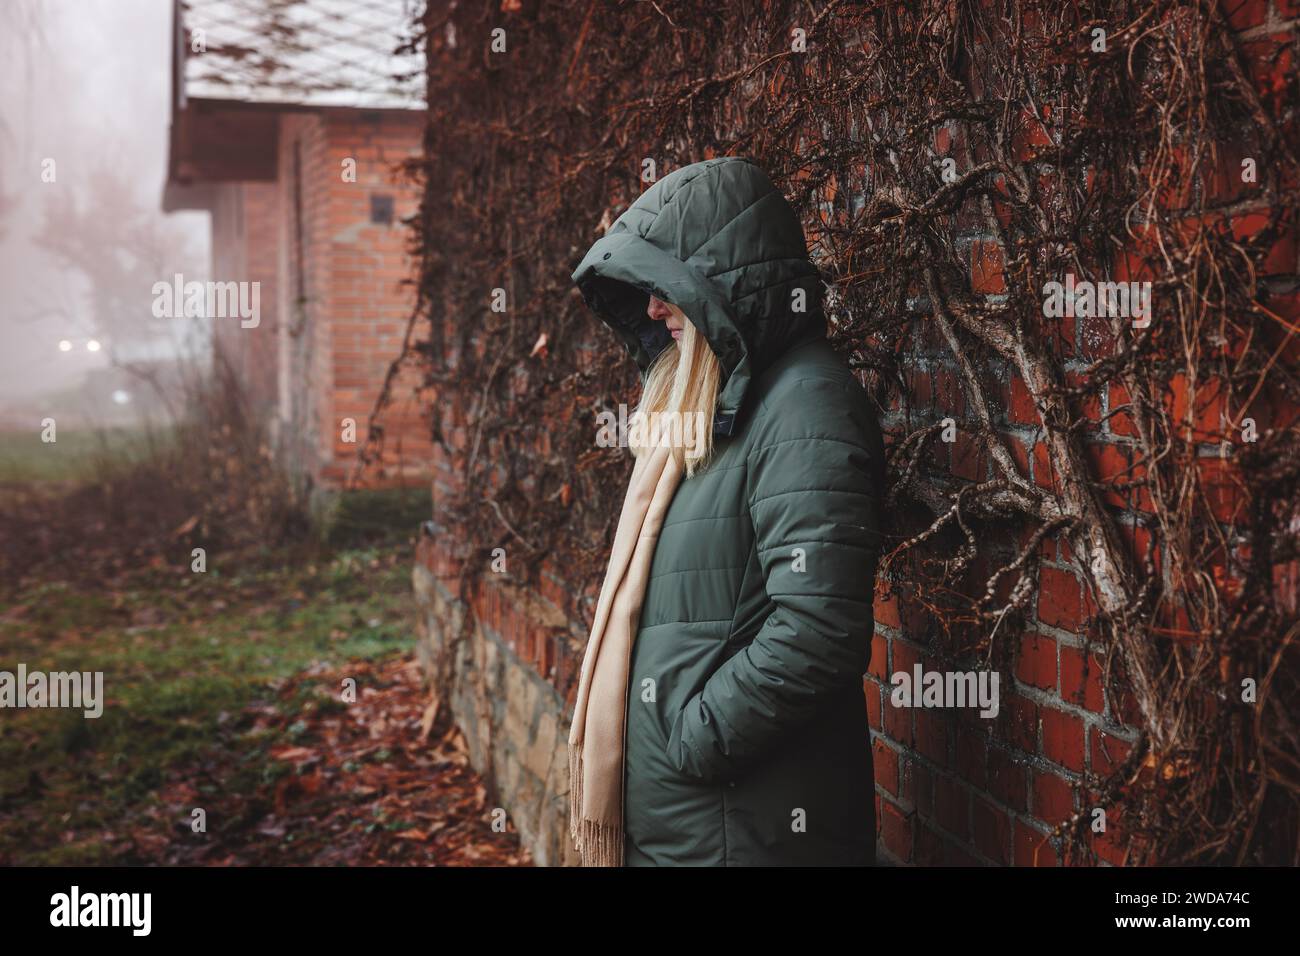 Sad lonely woman with hood standing by brick wall in fog. Loneliness and depression in own thoughts Stock Photo